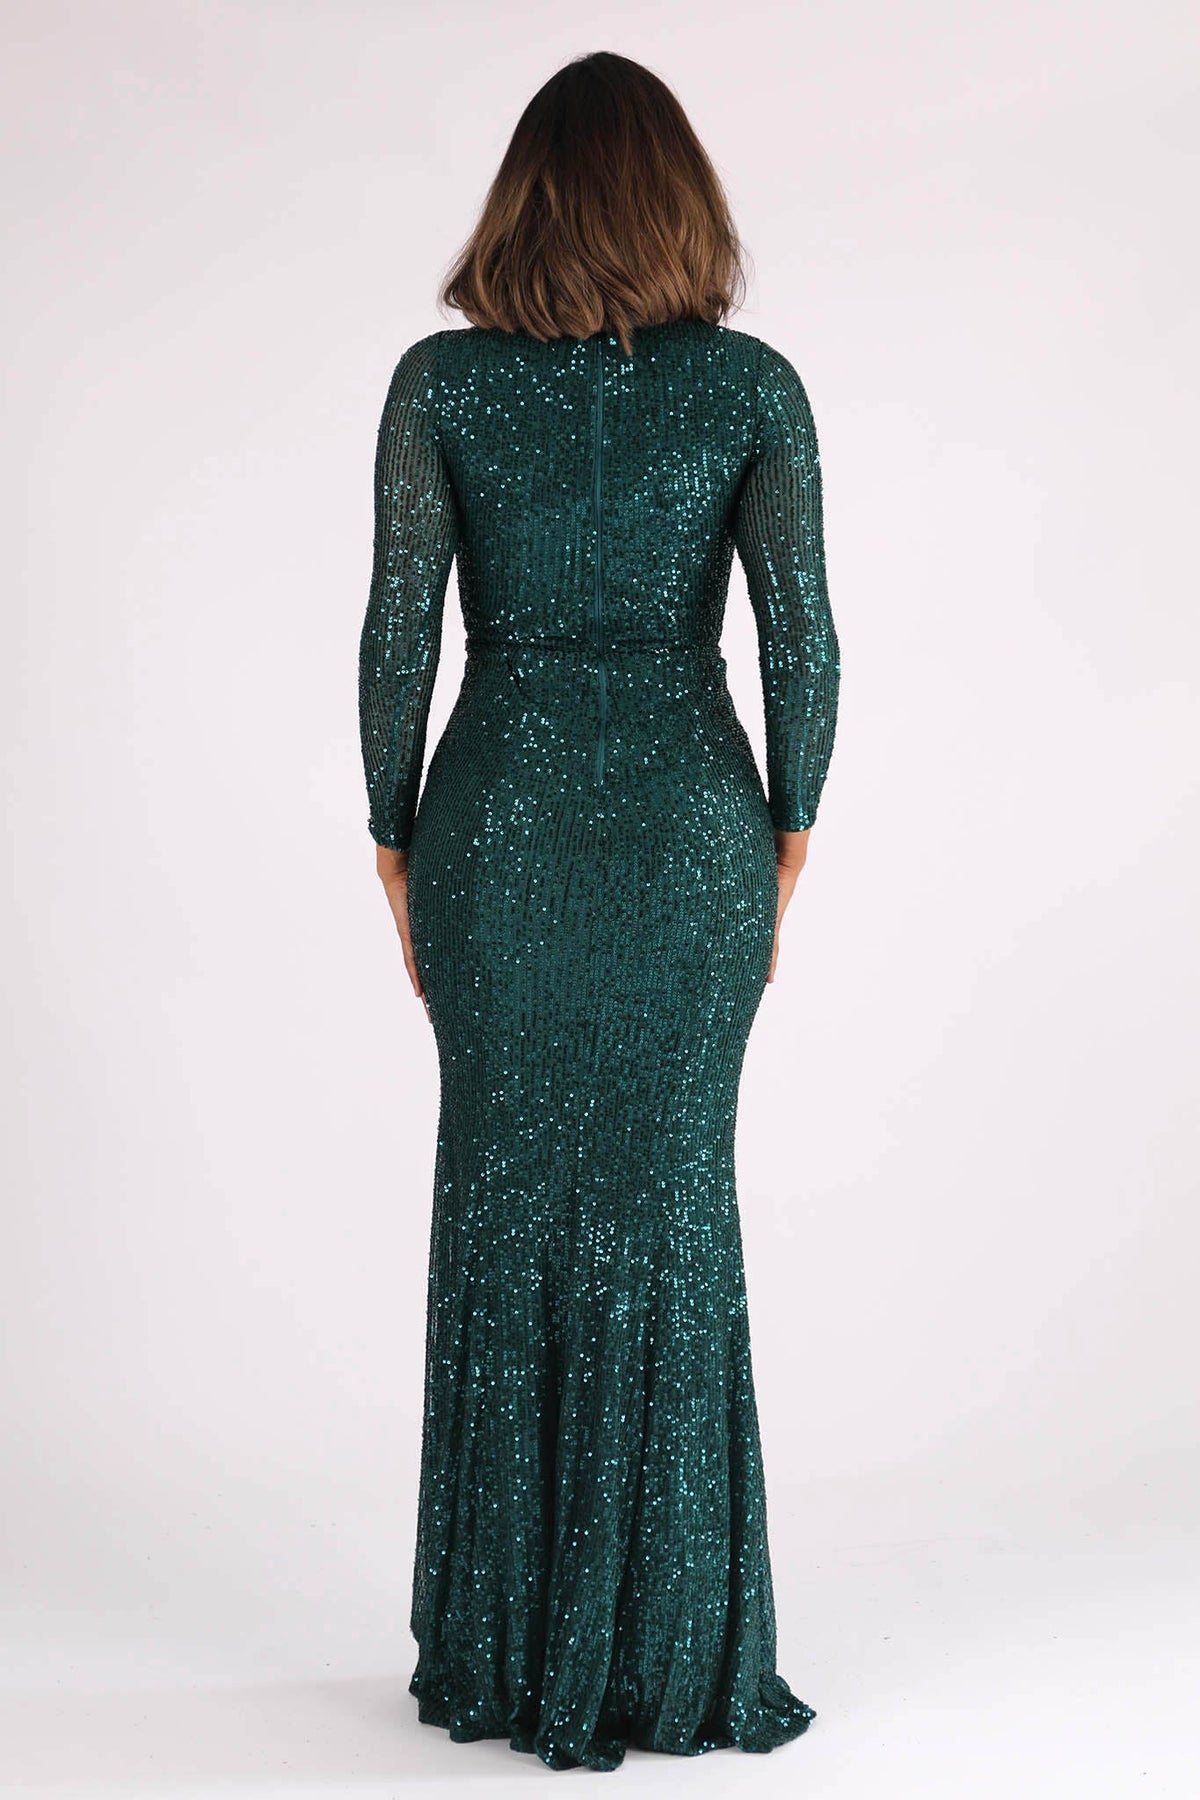 Closed Back Design of Emerald Green Sequin Long Sleeve Fitted Evening Maxi Dress with V Neckline, Column Silhouette and Side Split